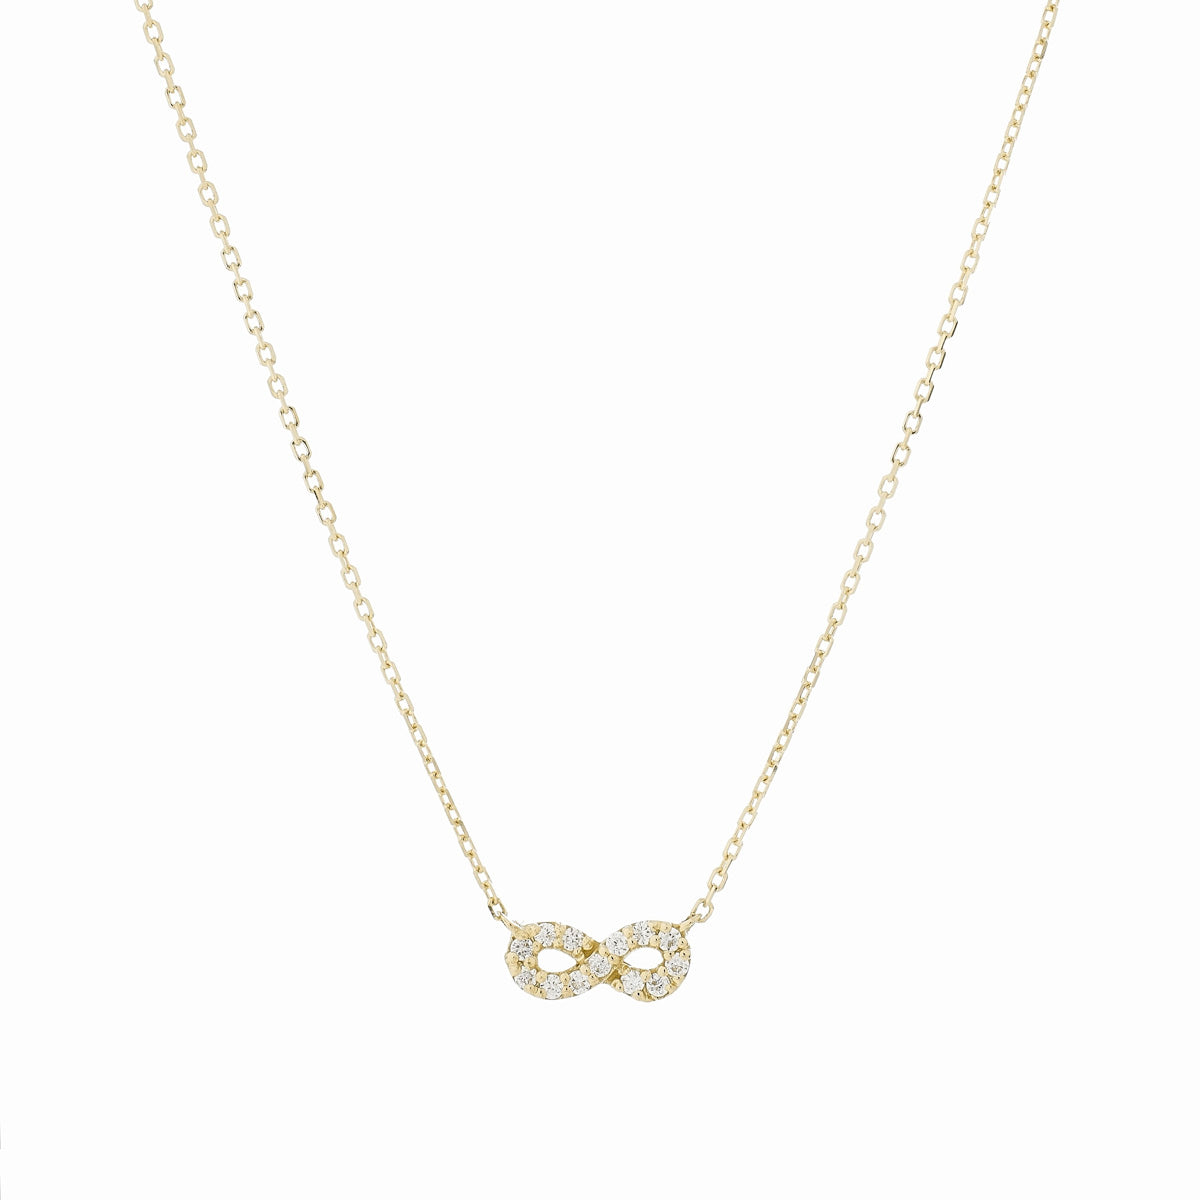 Infinity necklace 18k sterling gold and diamonds